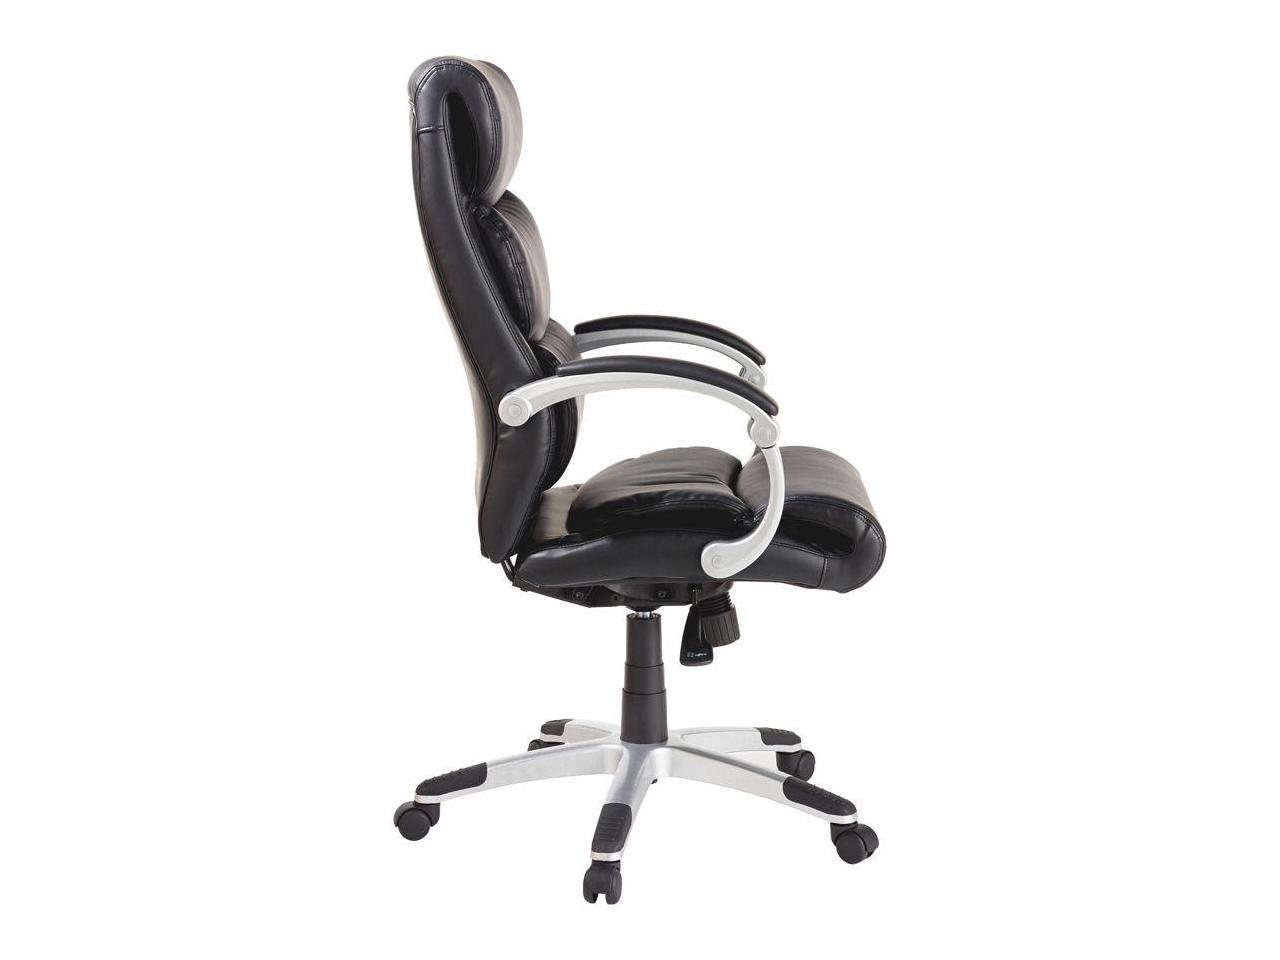 Lorell Exec High-Back Chair Leather Flex Arms 27"x30"x46-1/2" BK 60620 - image 5 of 19